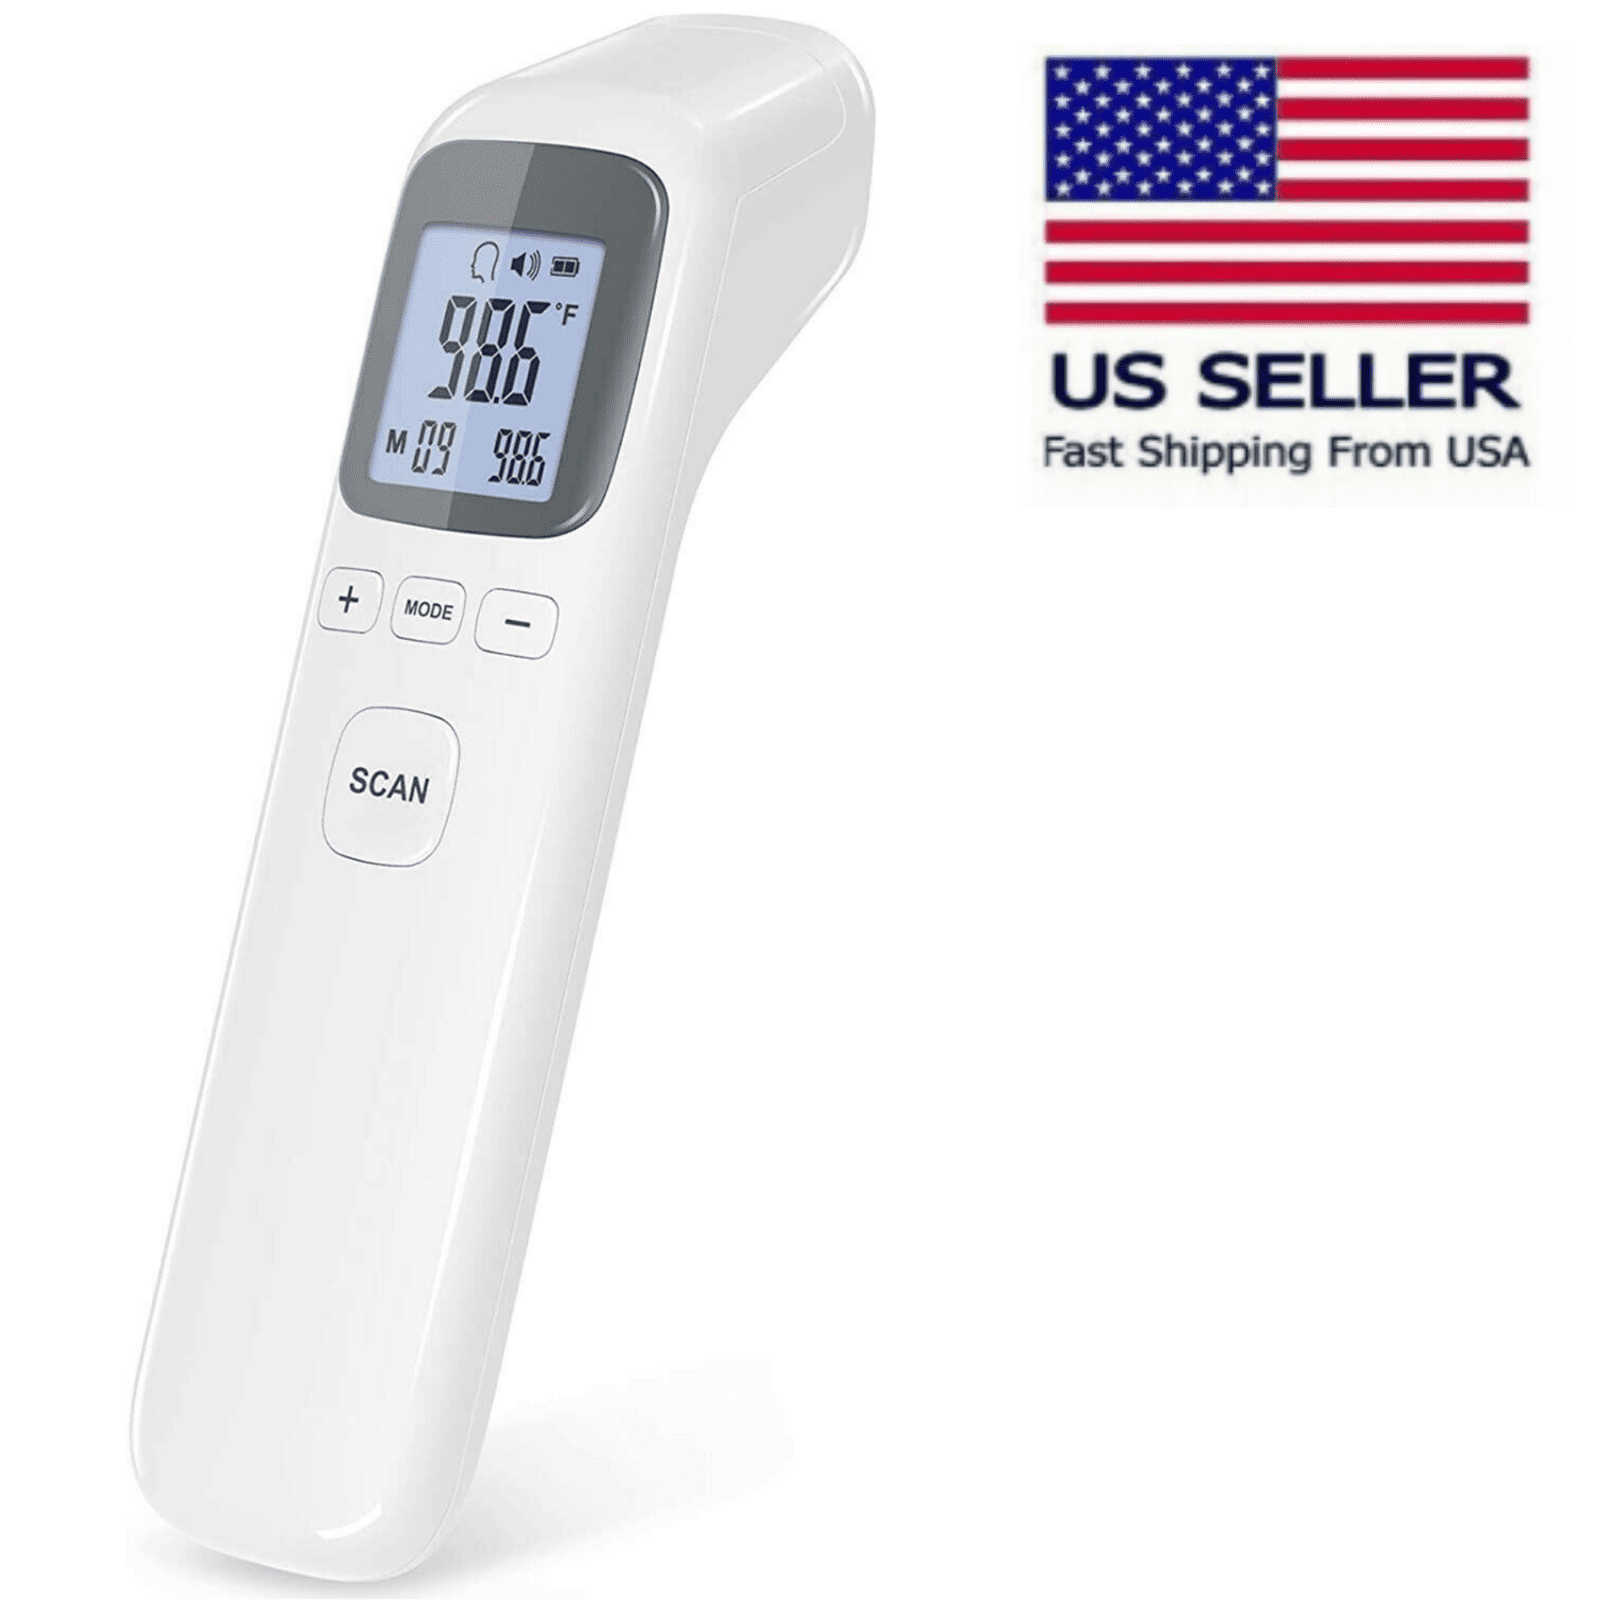 Baby Thermometer-ThermoPro TP905 Digital Medical Infrared Temporal Ear Thermometer for Fever Forehead Thermometer for Kids and Adults with Memory Recall 